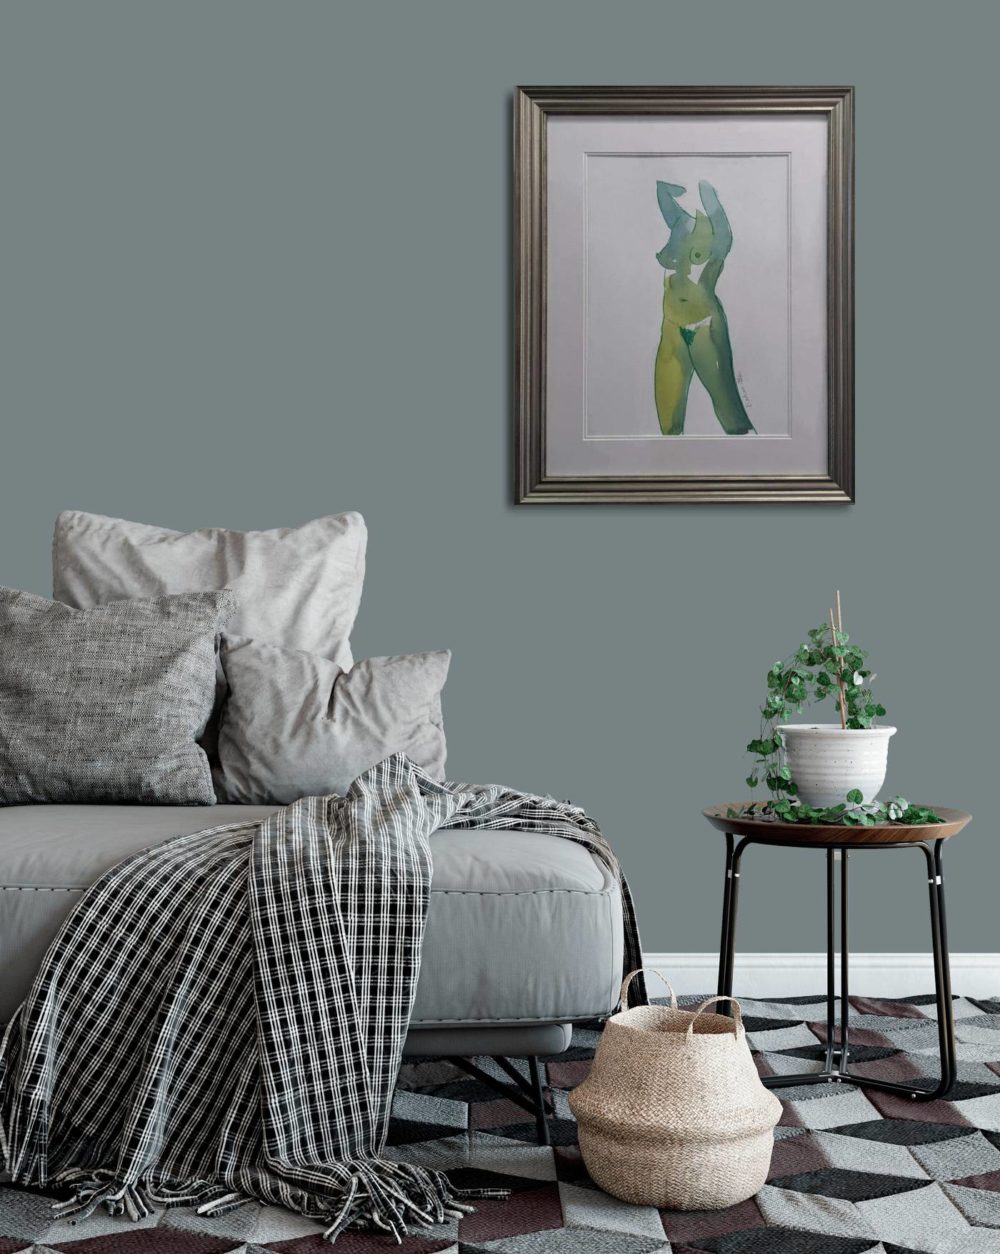 Green Nude In Silver Frame In Room